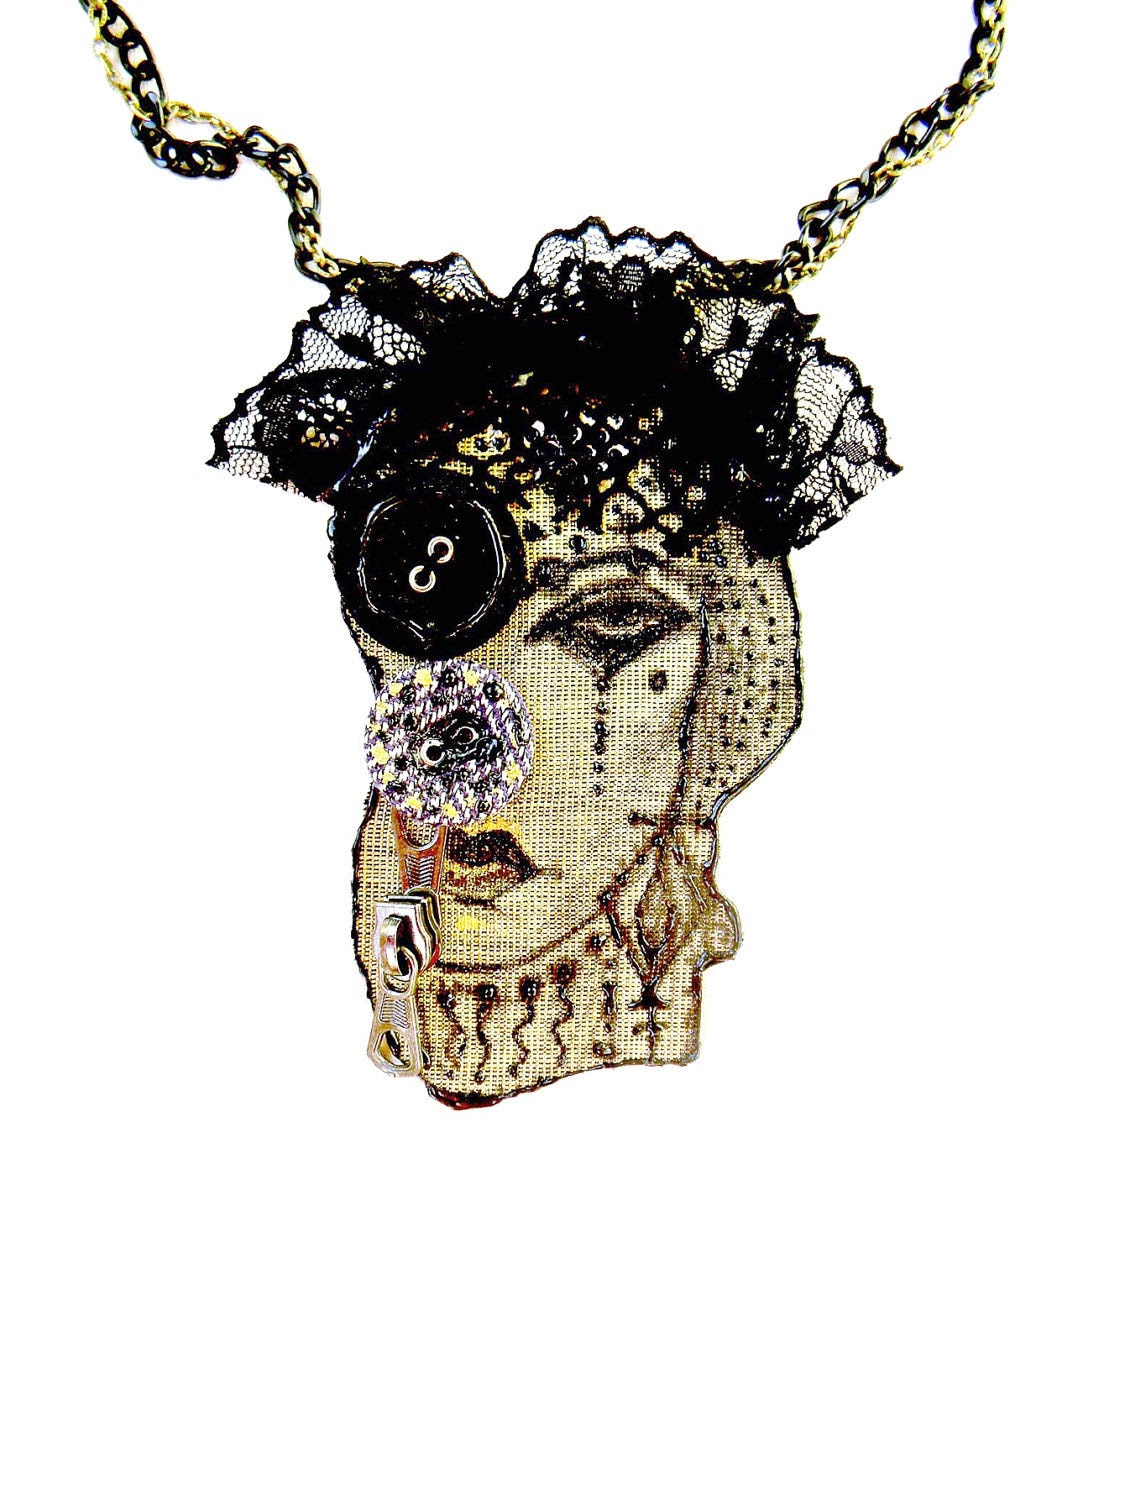 Statement necklace, steampunk, original drawing, vampire, textile jewelry, lolita, lace, gothic, circus, weird, burlesque, whimsical - Elyseeart